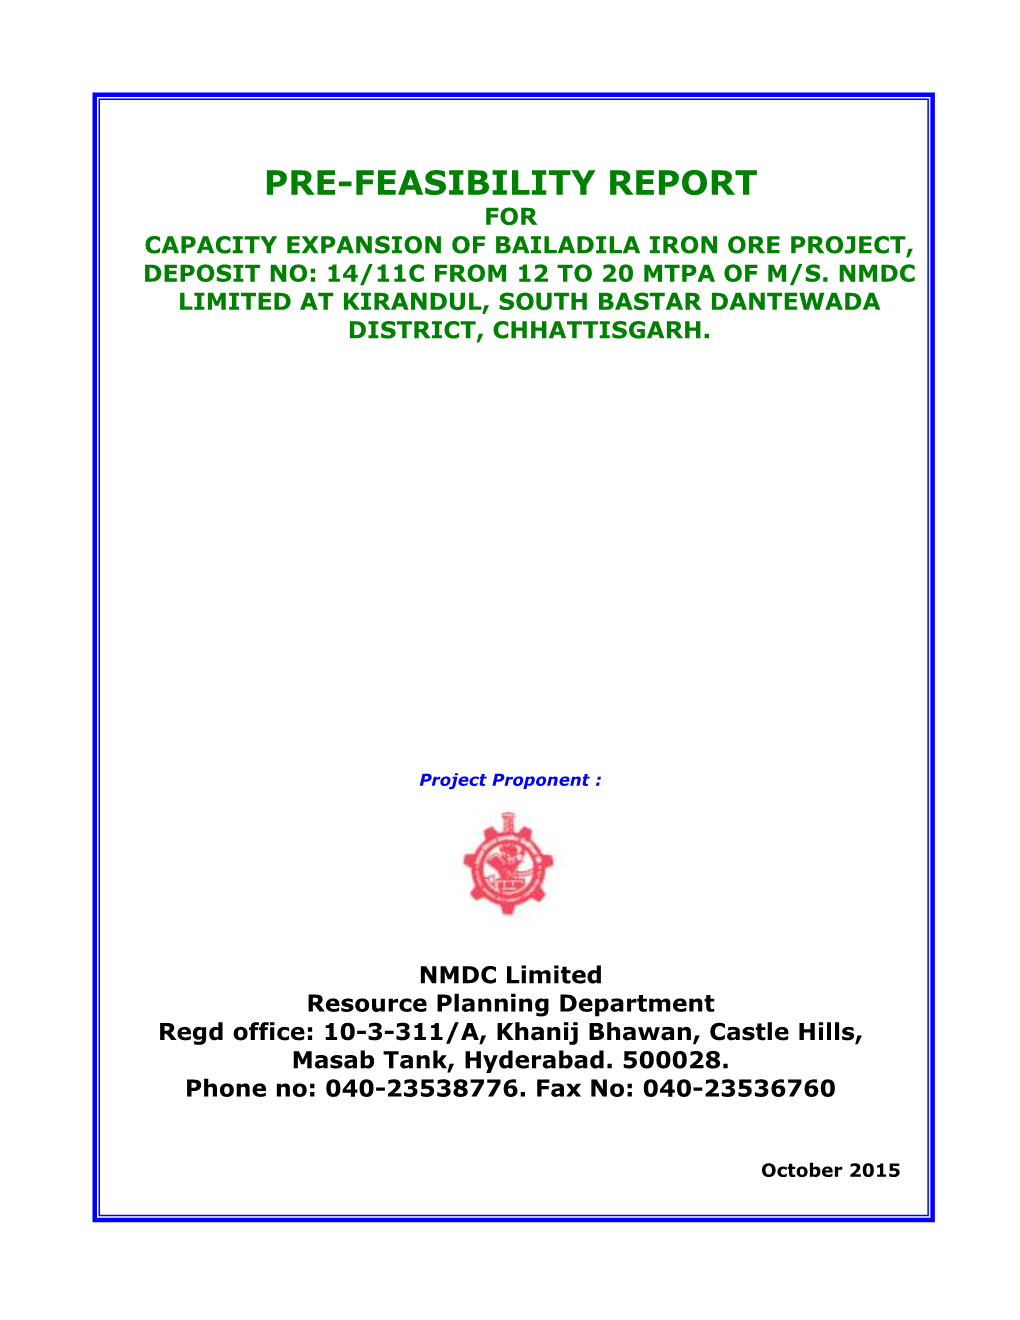 Pre-Feasibility Report for Capacity Expansion of Bailadila Iron Ore Project, Deposit No: 14/11C from 12 to 20 Mtpa of M/S